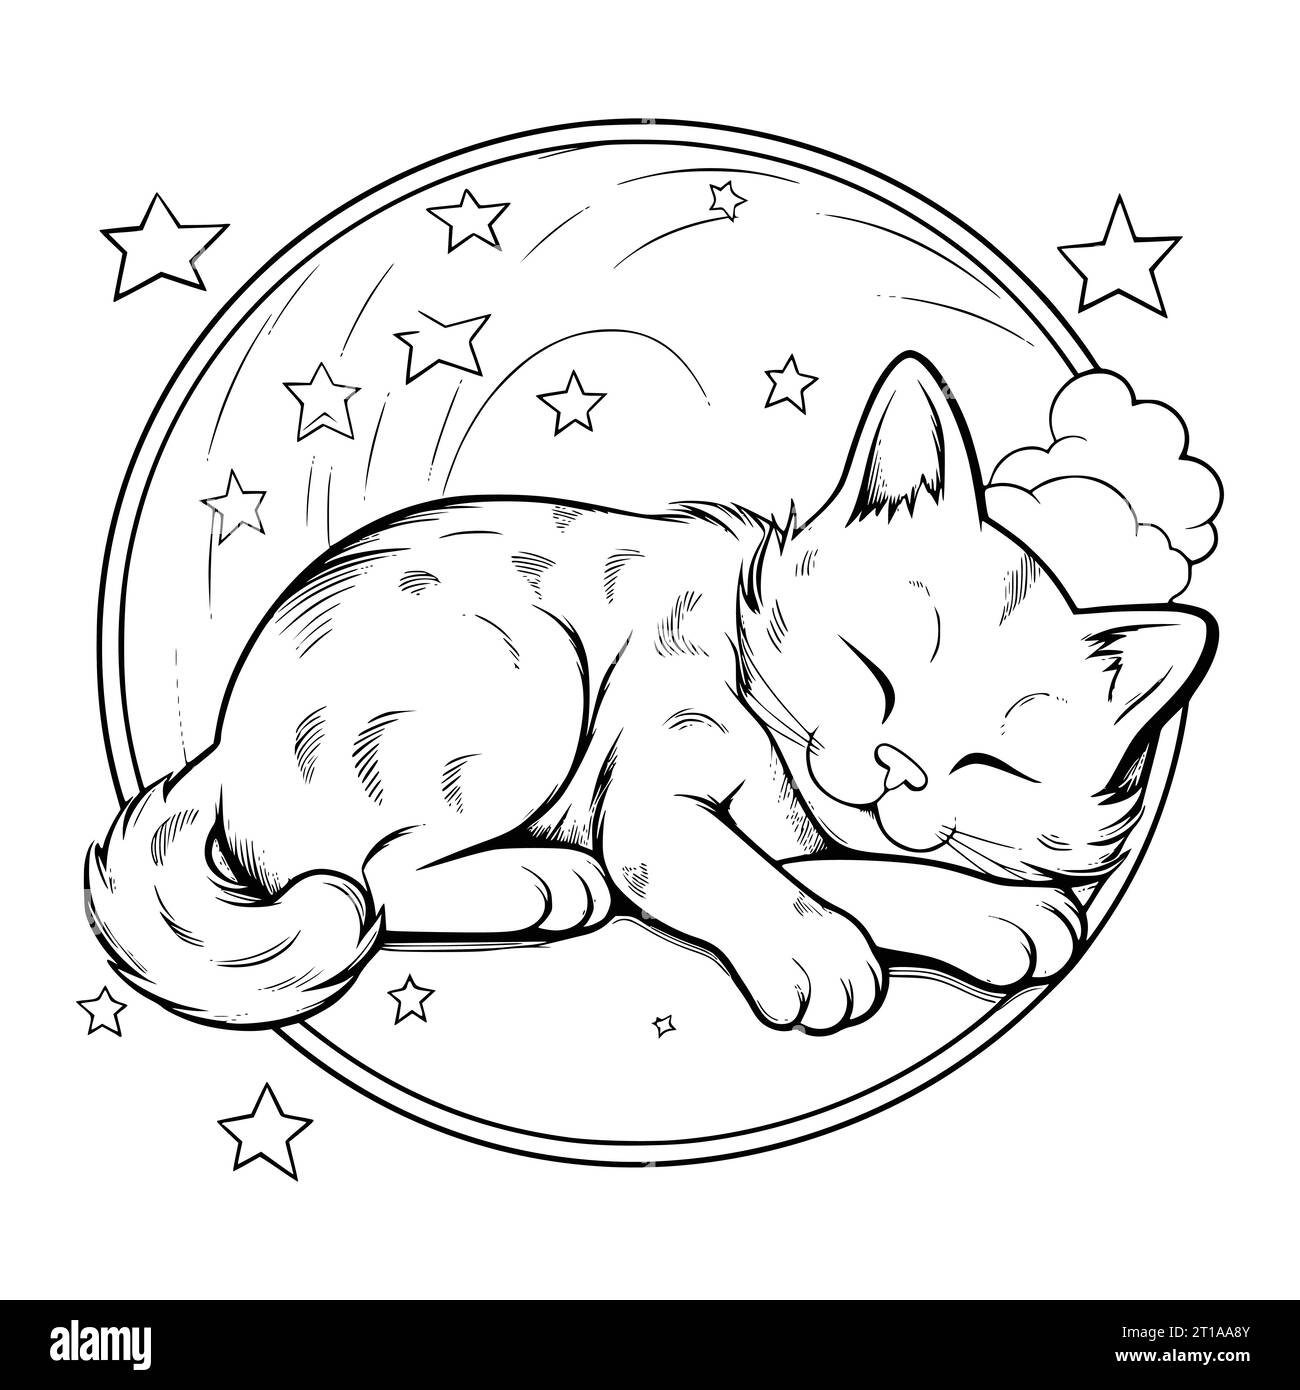 Cat Sleeping Coloring Page Drawing For Kids Stock Vector